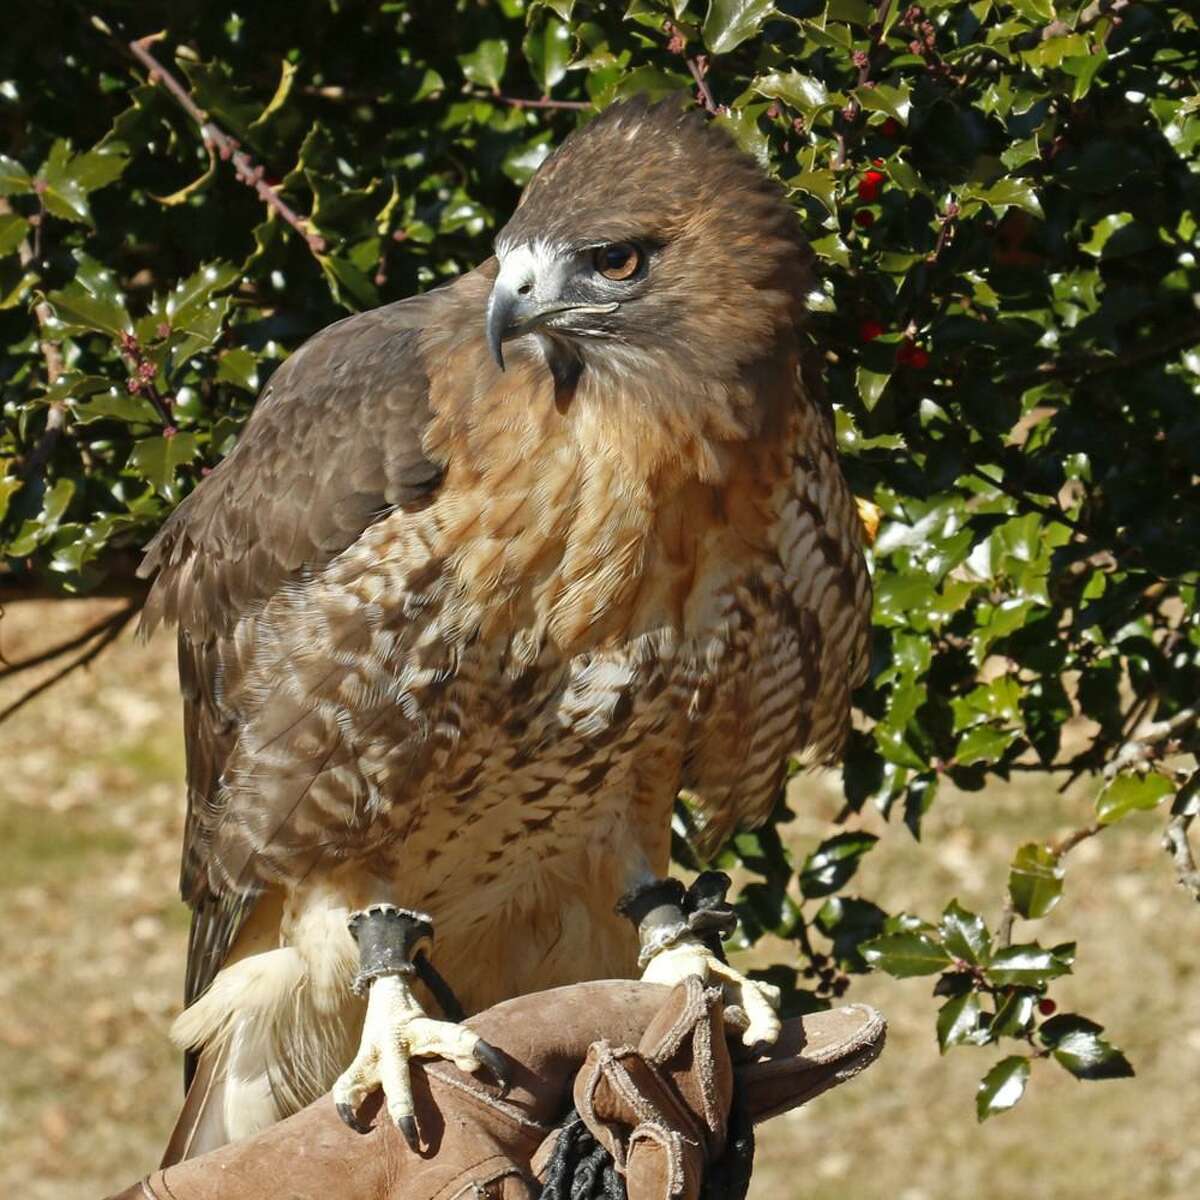 Chance, a dark morphed red tailed hawk